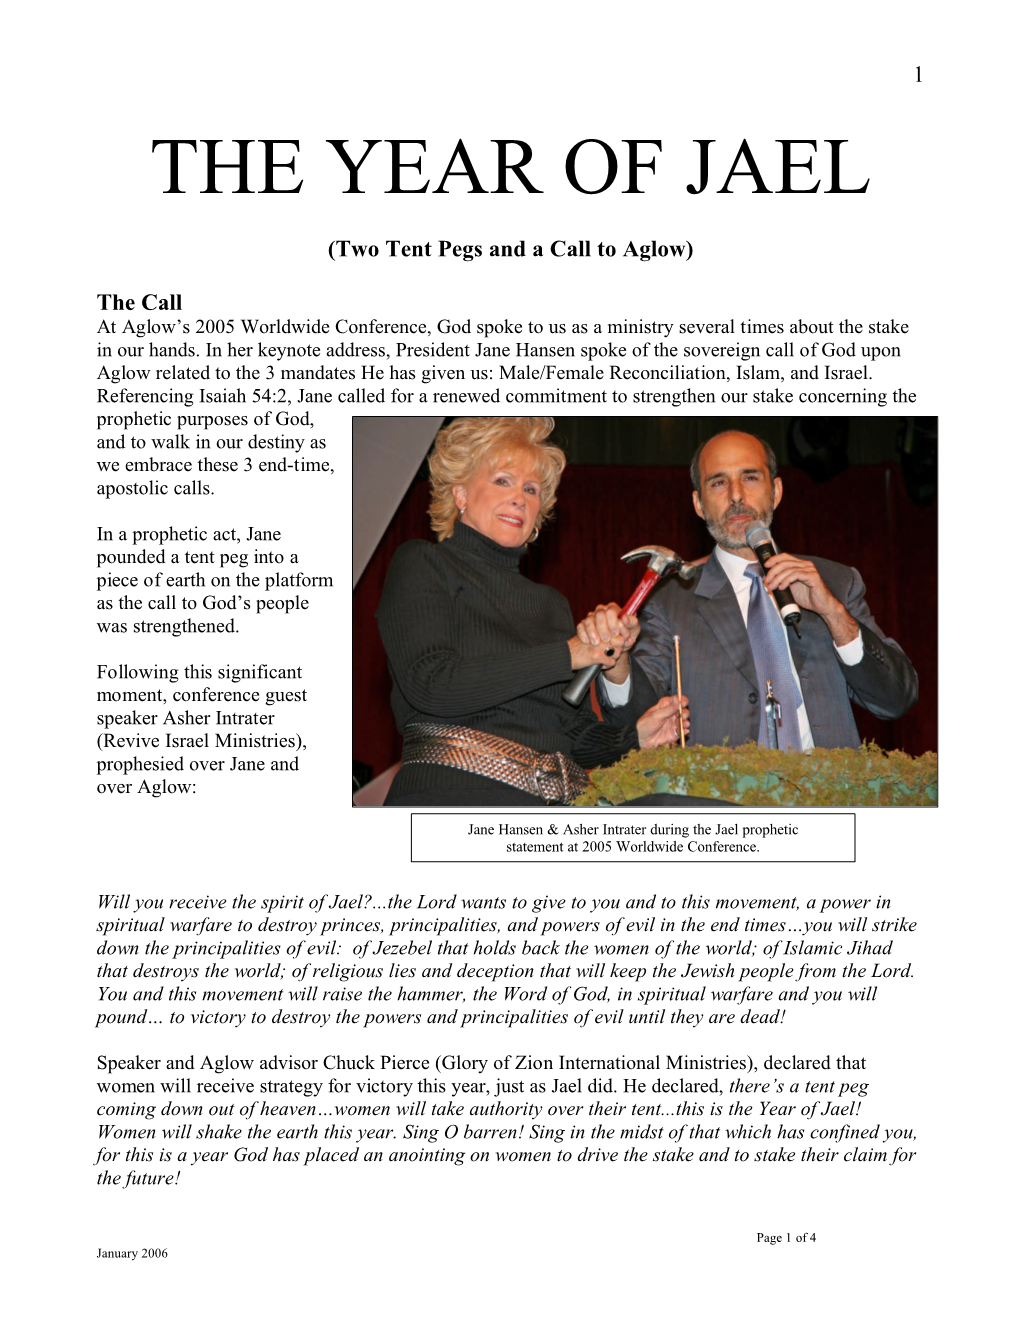 The Year of Jael